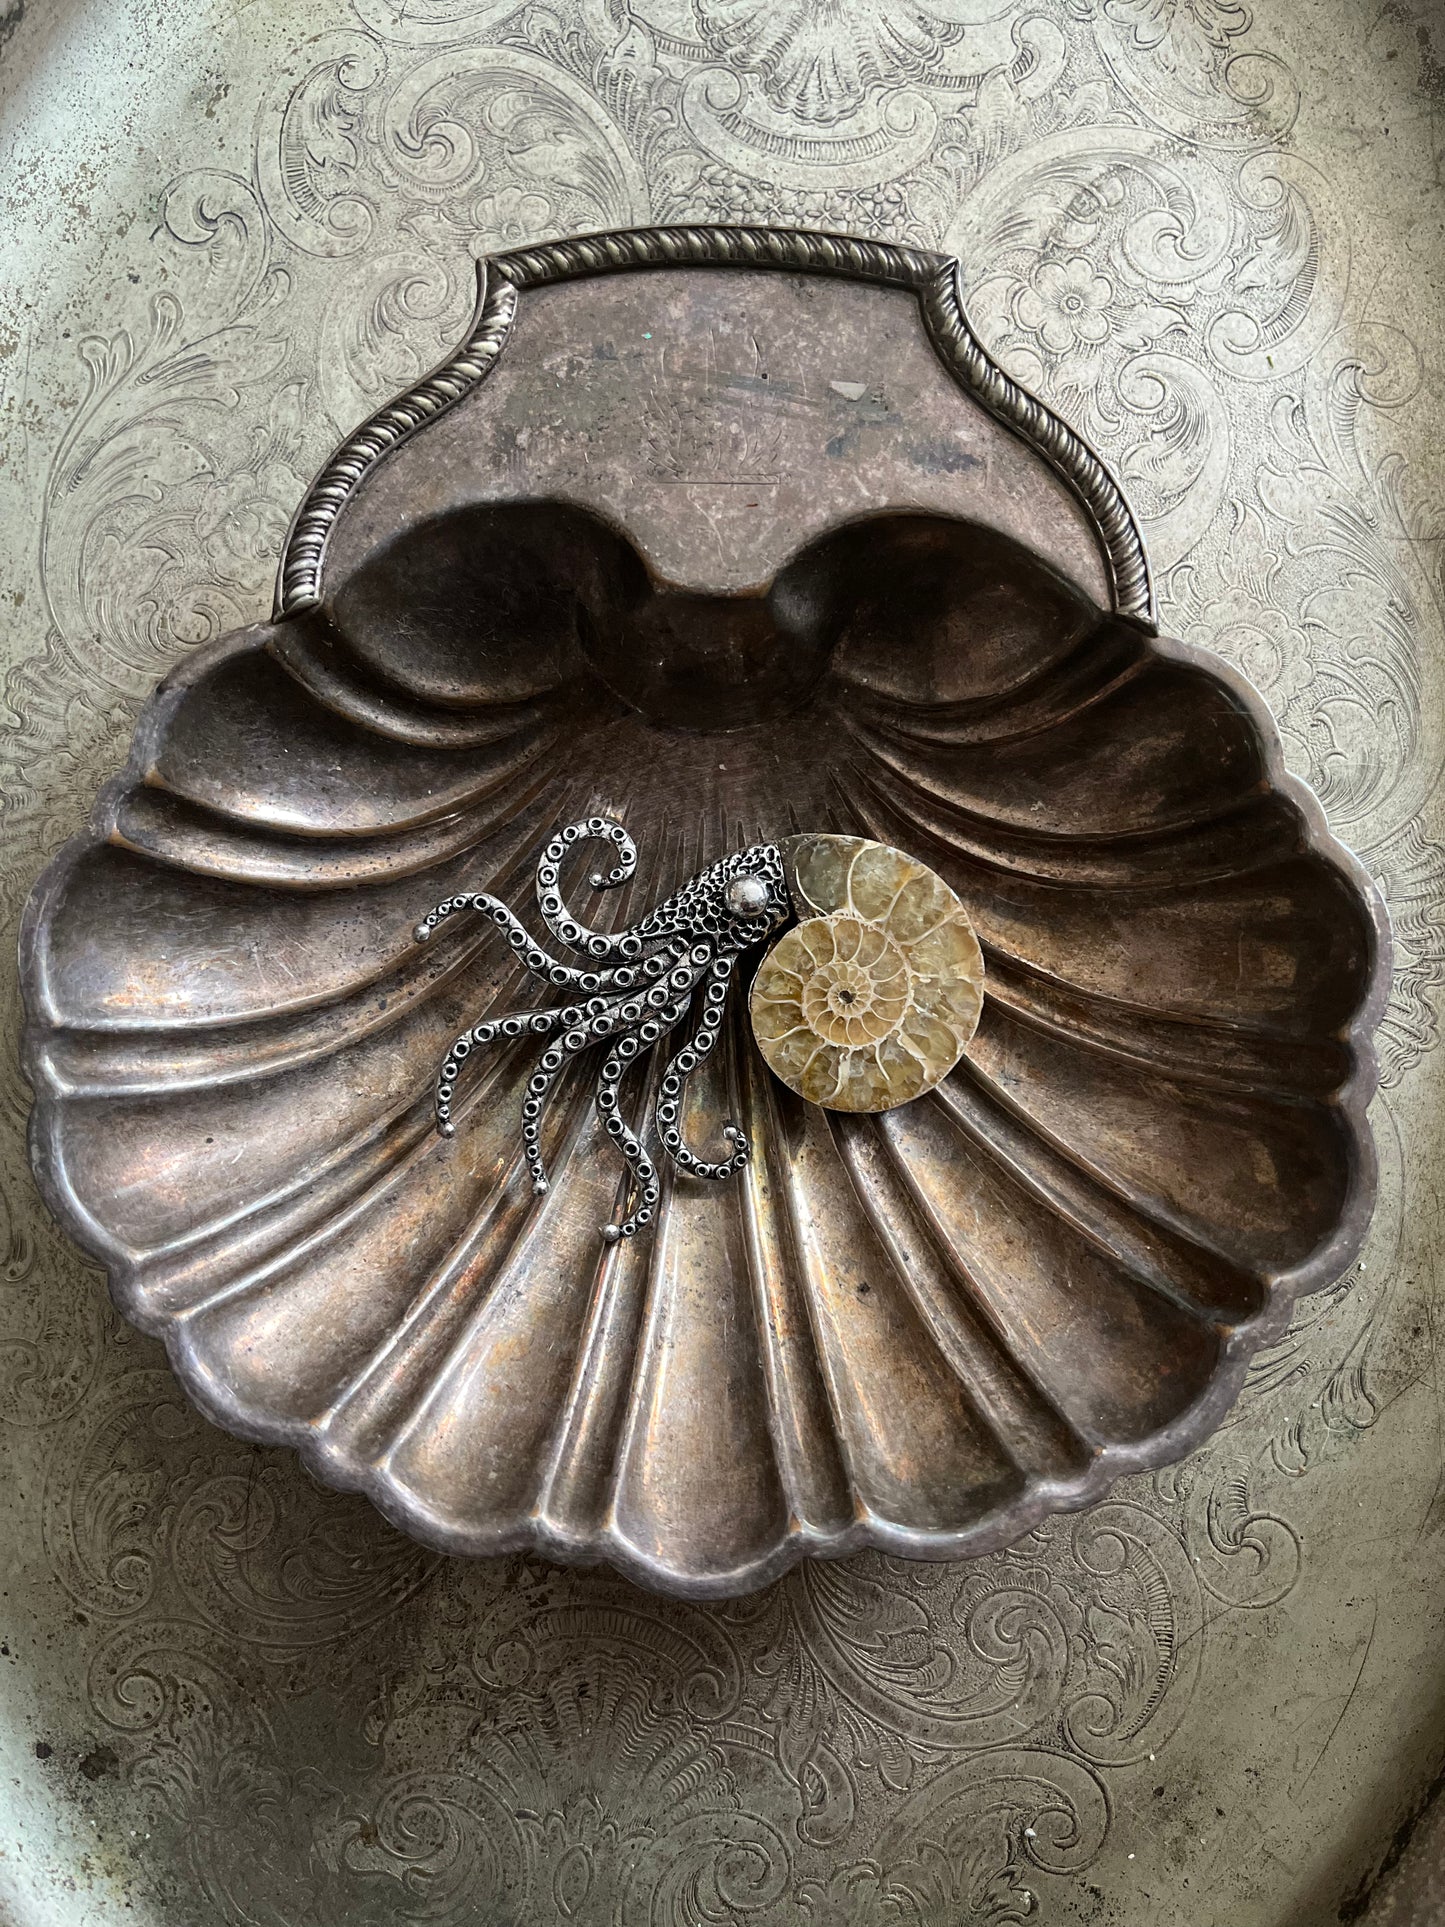 Nautilus Shell Tentacle Brooch